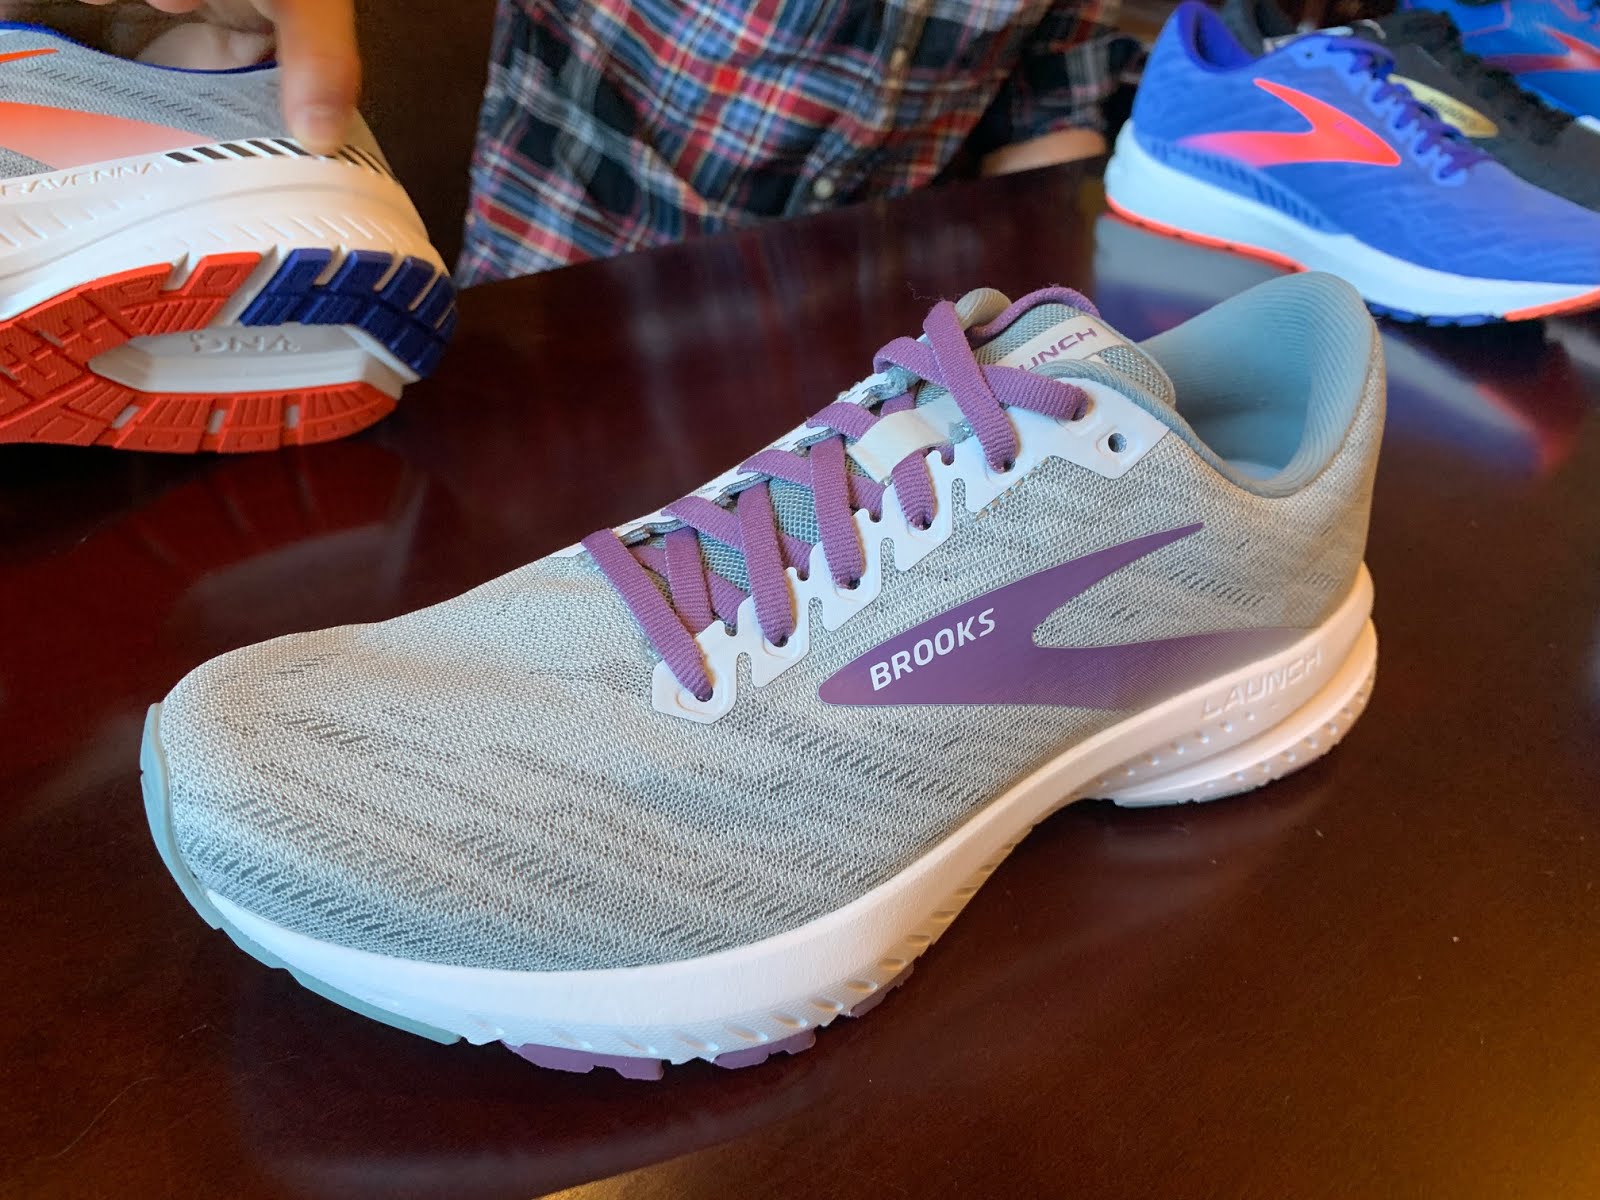 when does brooks release new shoes